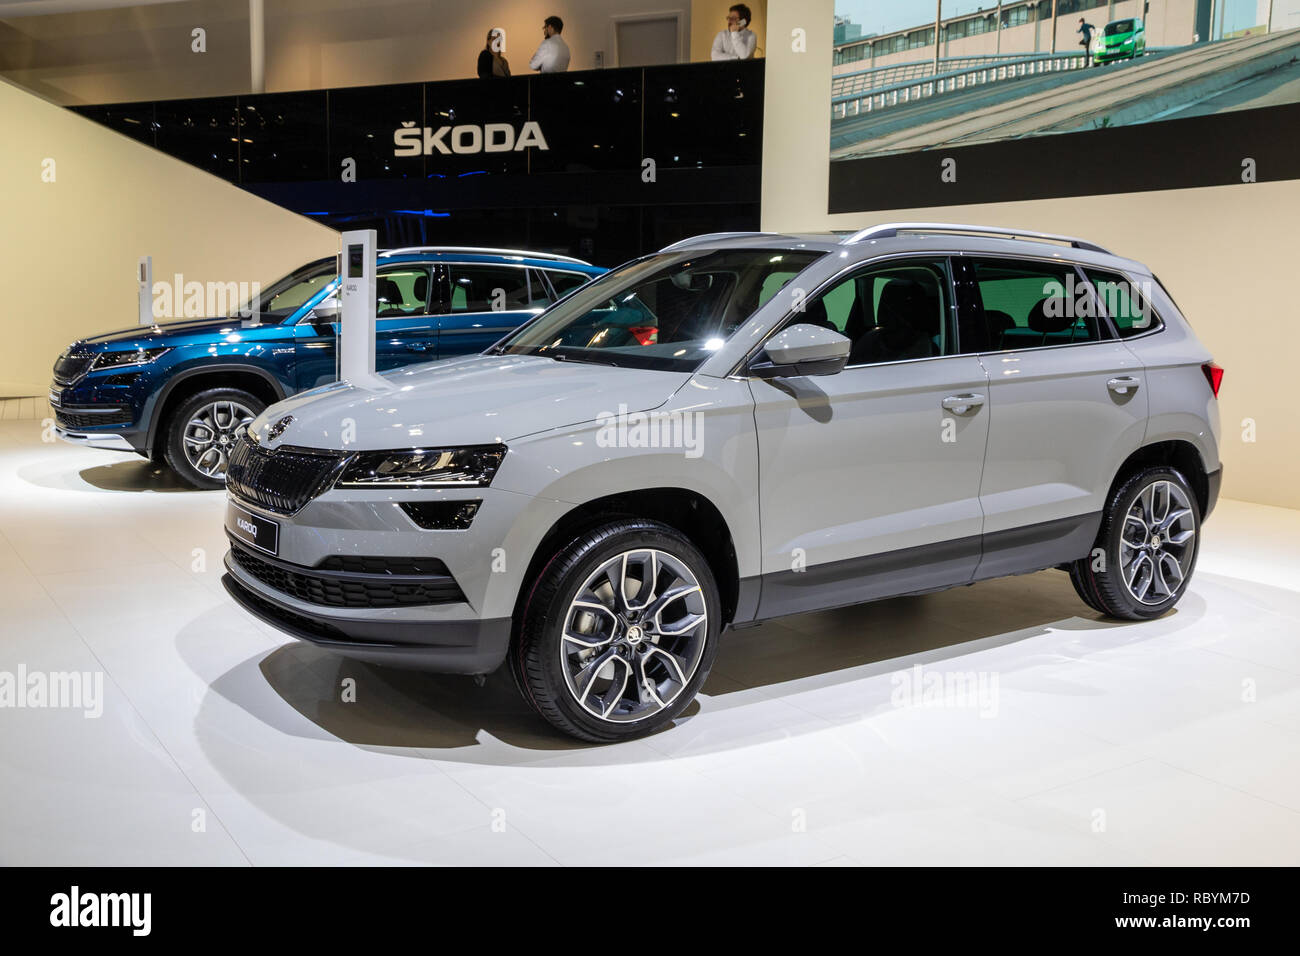 BRUSSELS - JAN 10, 2018: Skoda Karoq compact SUV car showcased at the Brussels Expo Autosalon motor show. Stock Photo